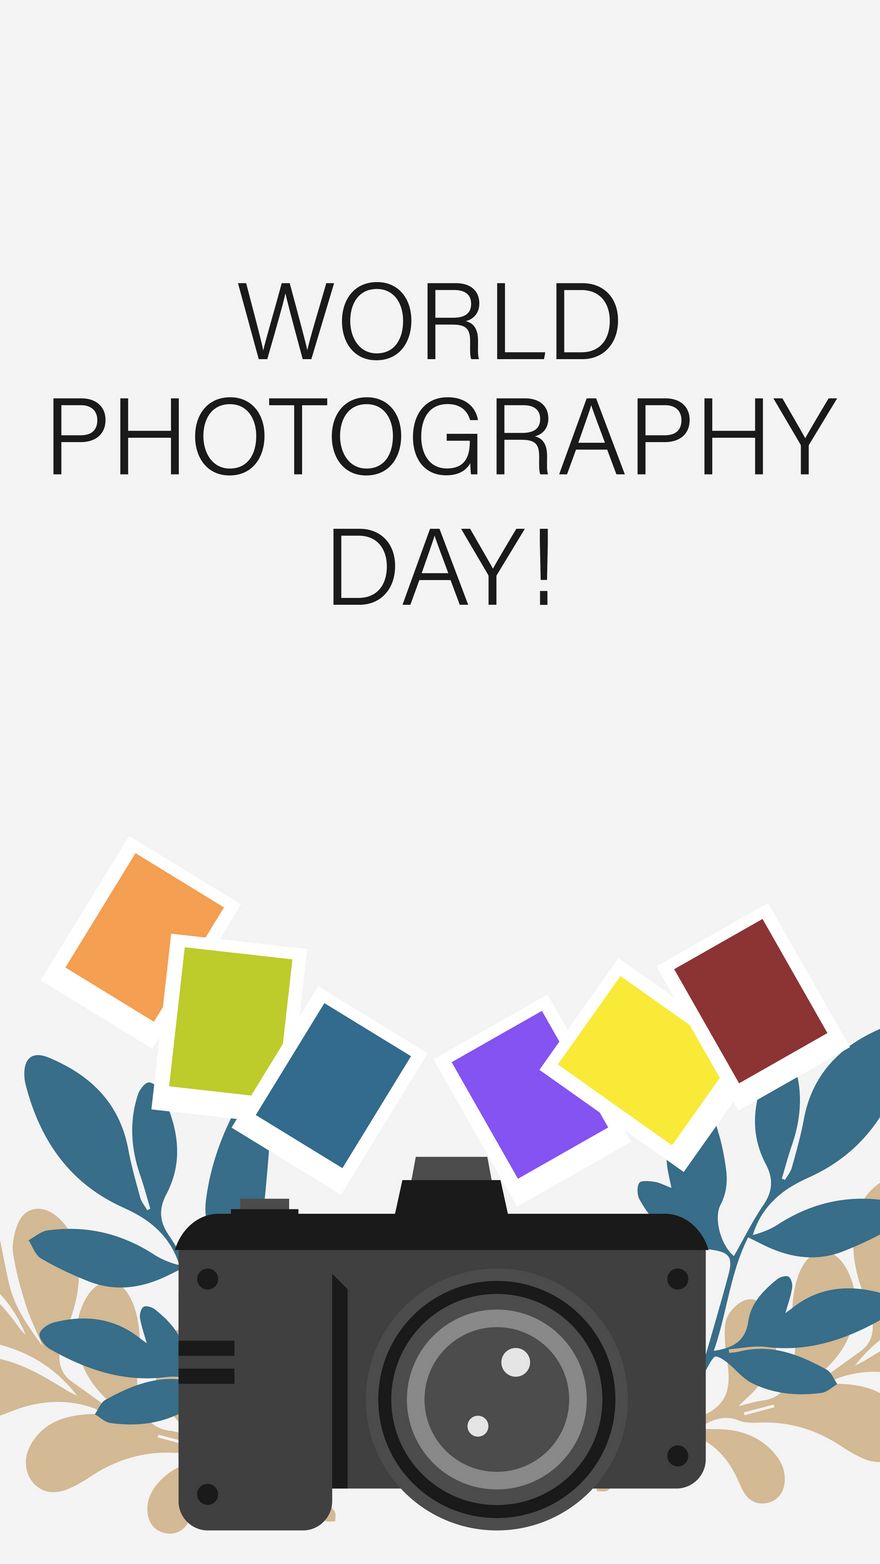 World Photography Day Greeting Card Background in PDF, Illustrator, PSD, EPS, SVG, JPG, PNG